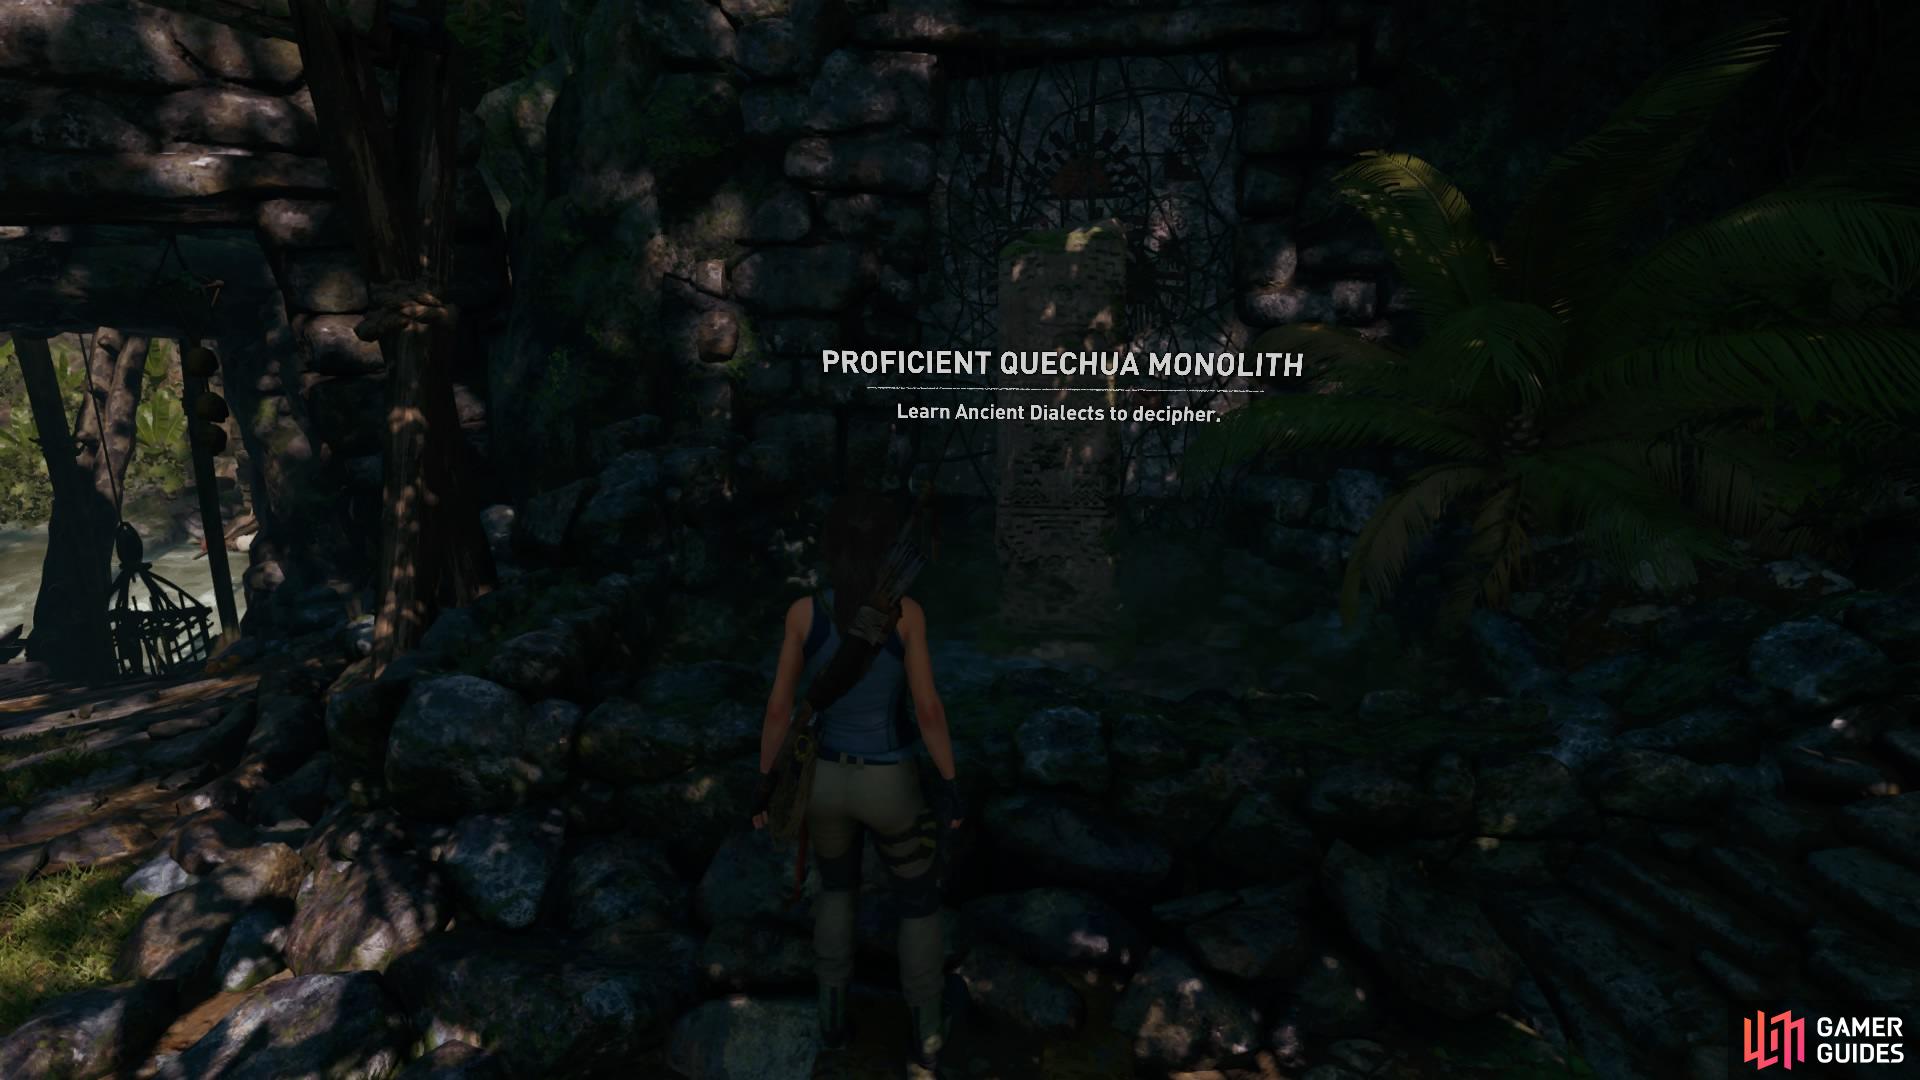 This monolith is unreadable at this point in the game